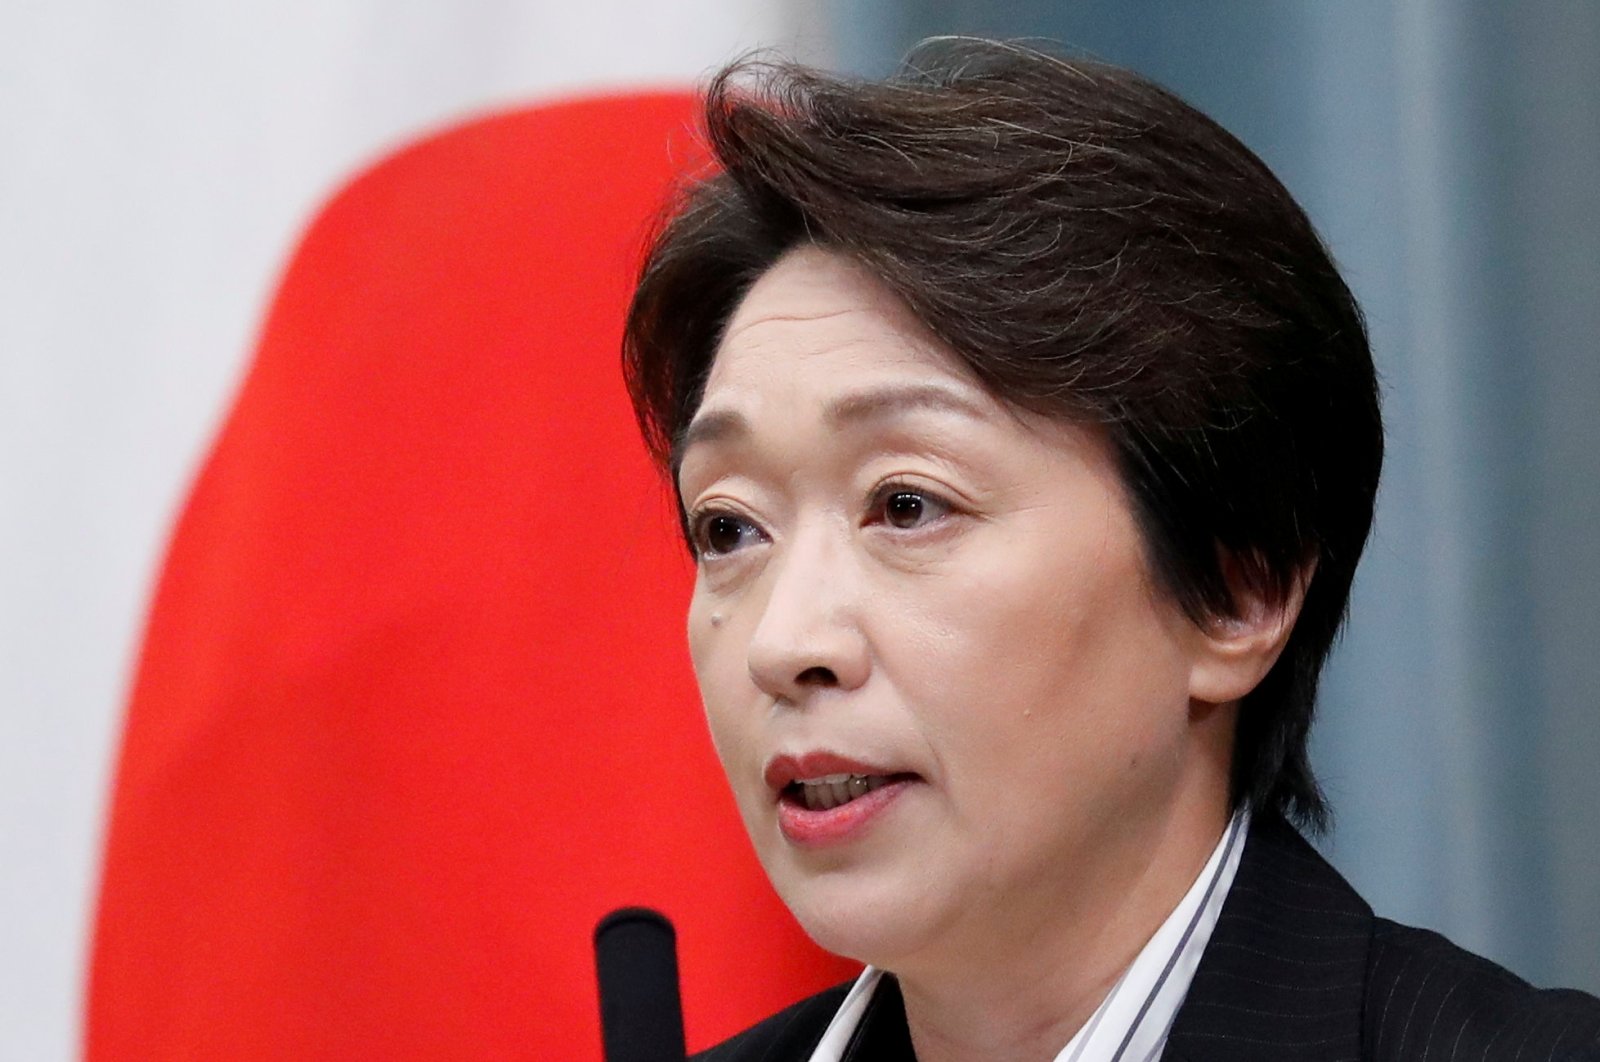 Japan's Olympics Minister Seiko Hashimoto attends a news conference at Prime Minister Shinzo Abe's official residence in Tokyo, Japan, Sept. 11, 2019. REUTERS/Issei Kato/File Photo